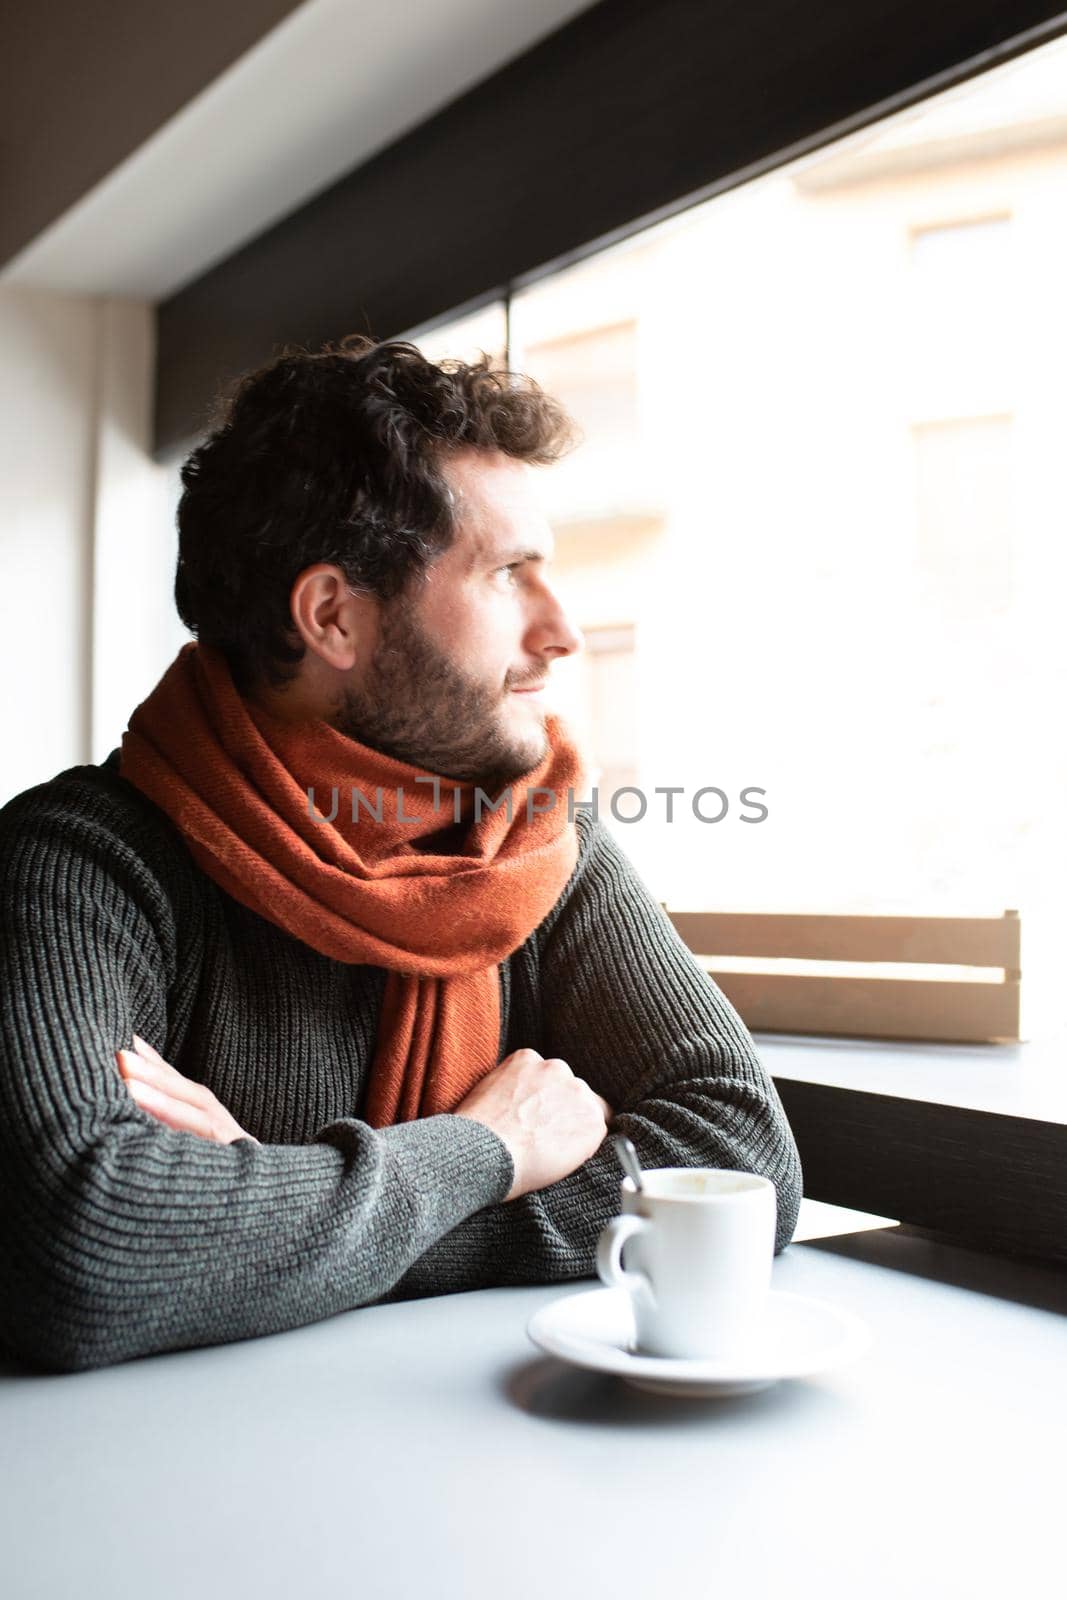 Pensive young man looking out the window, enjoying early morning in coffee shop. Vertical image. by Hoverstock